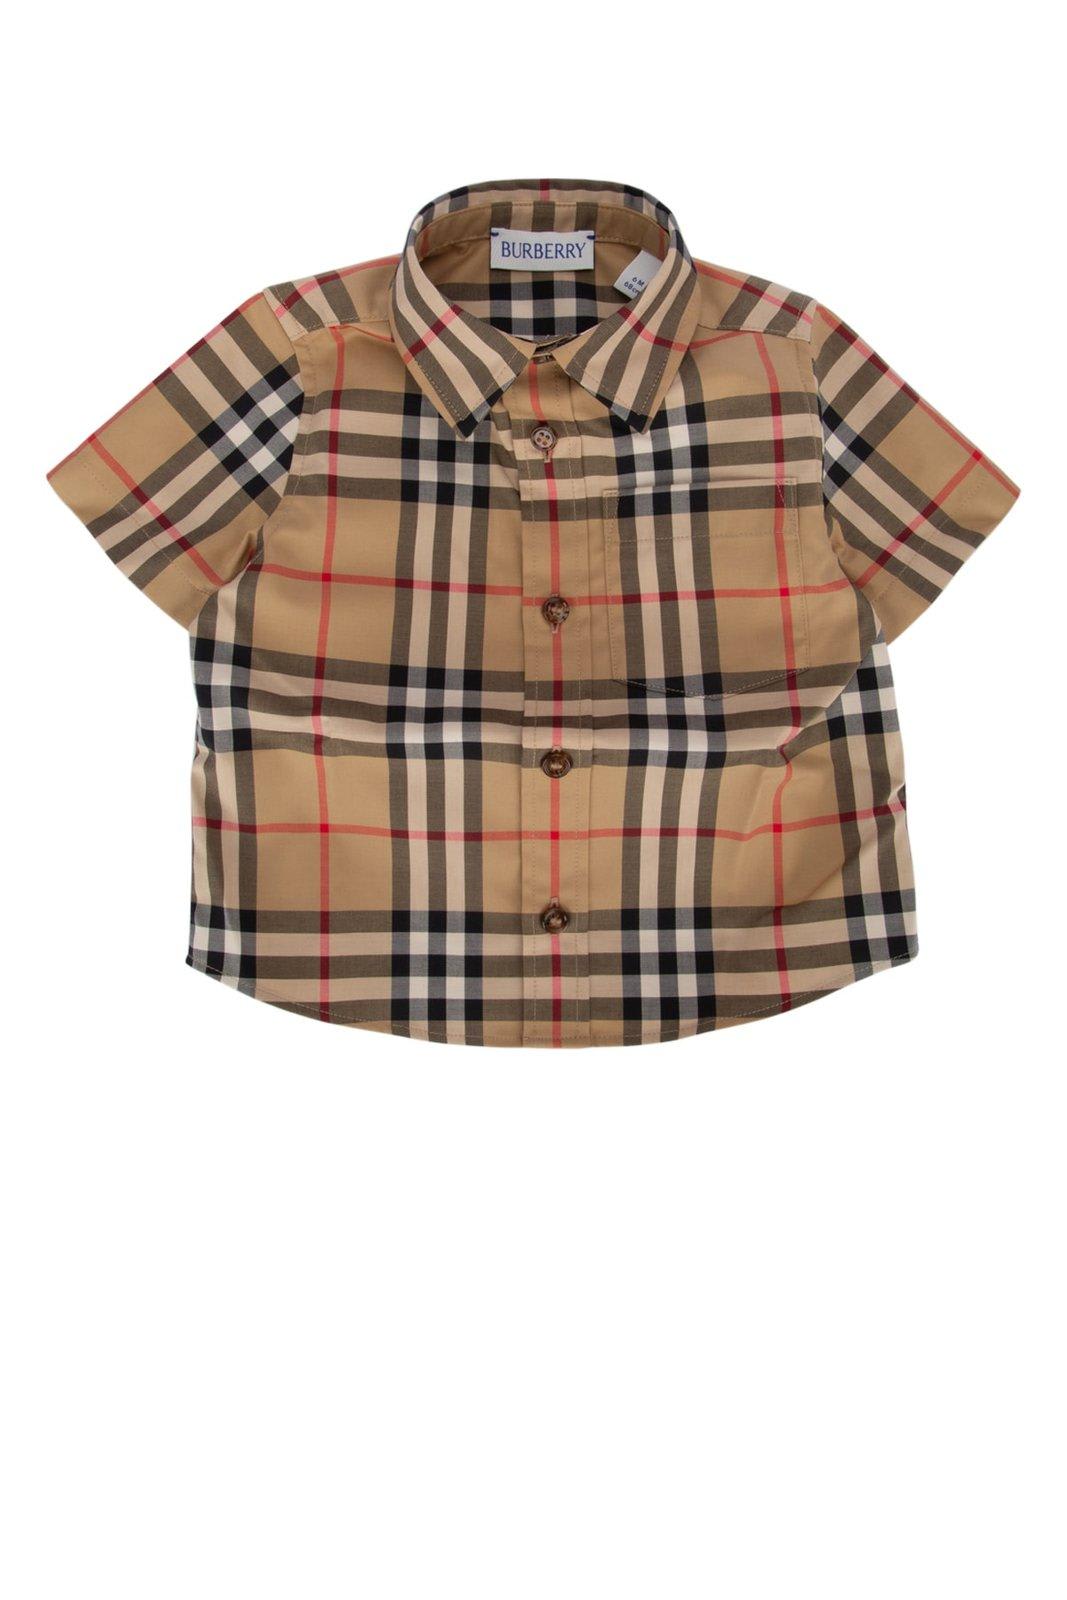 Burberry Kids' Check Pattern Short-sleeved Shirt In Brown